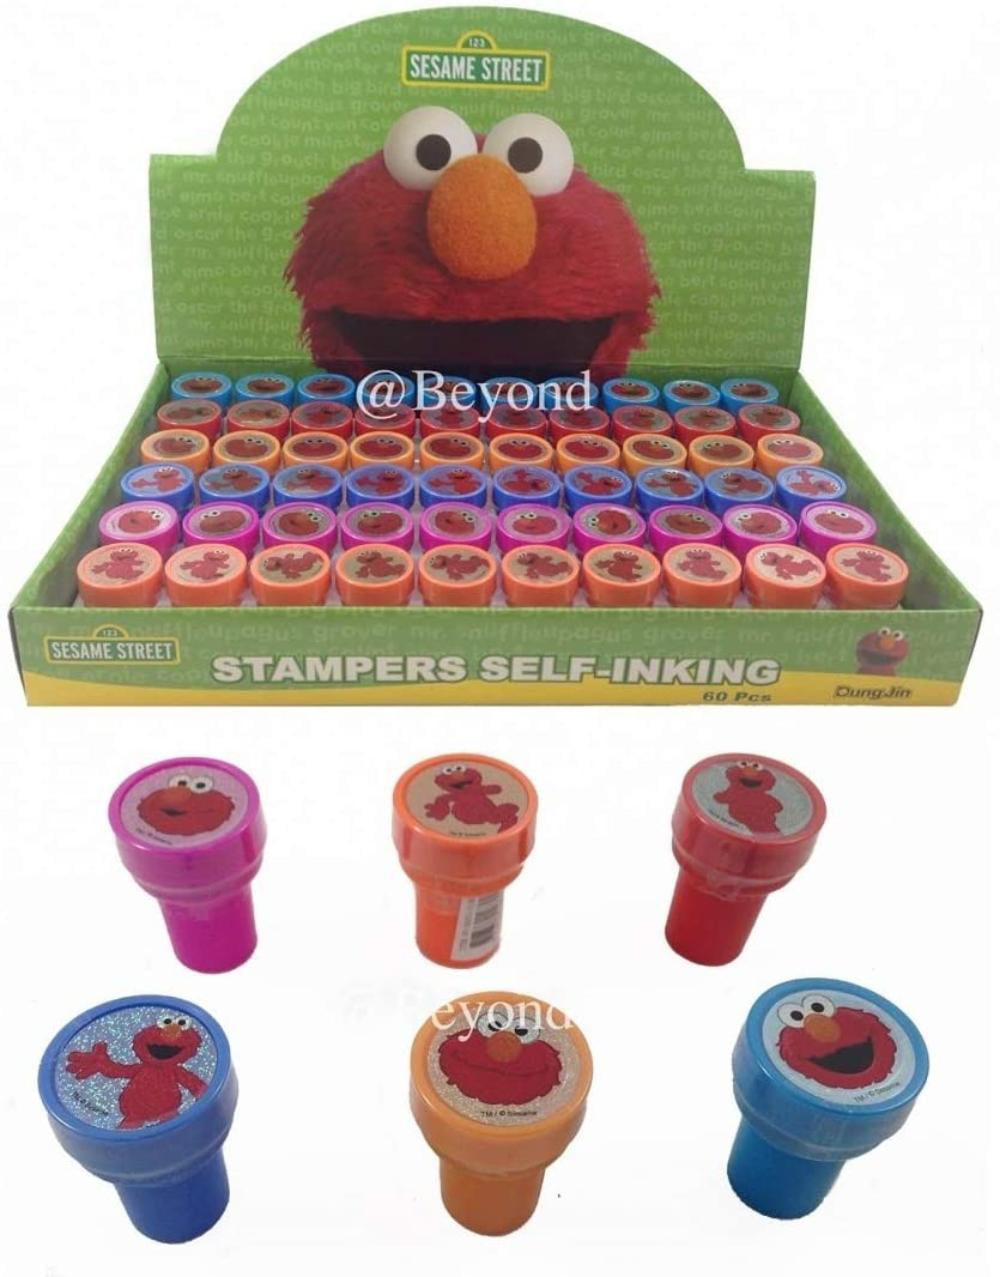 Sesame Street Elmo Stamps Stampers Self-inking Party Favors Full Box! 60ct New!